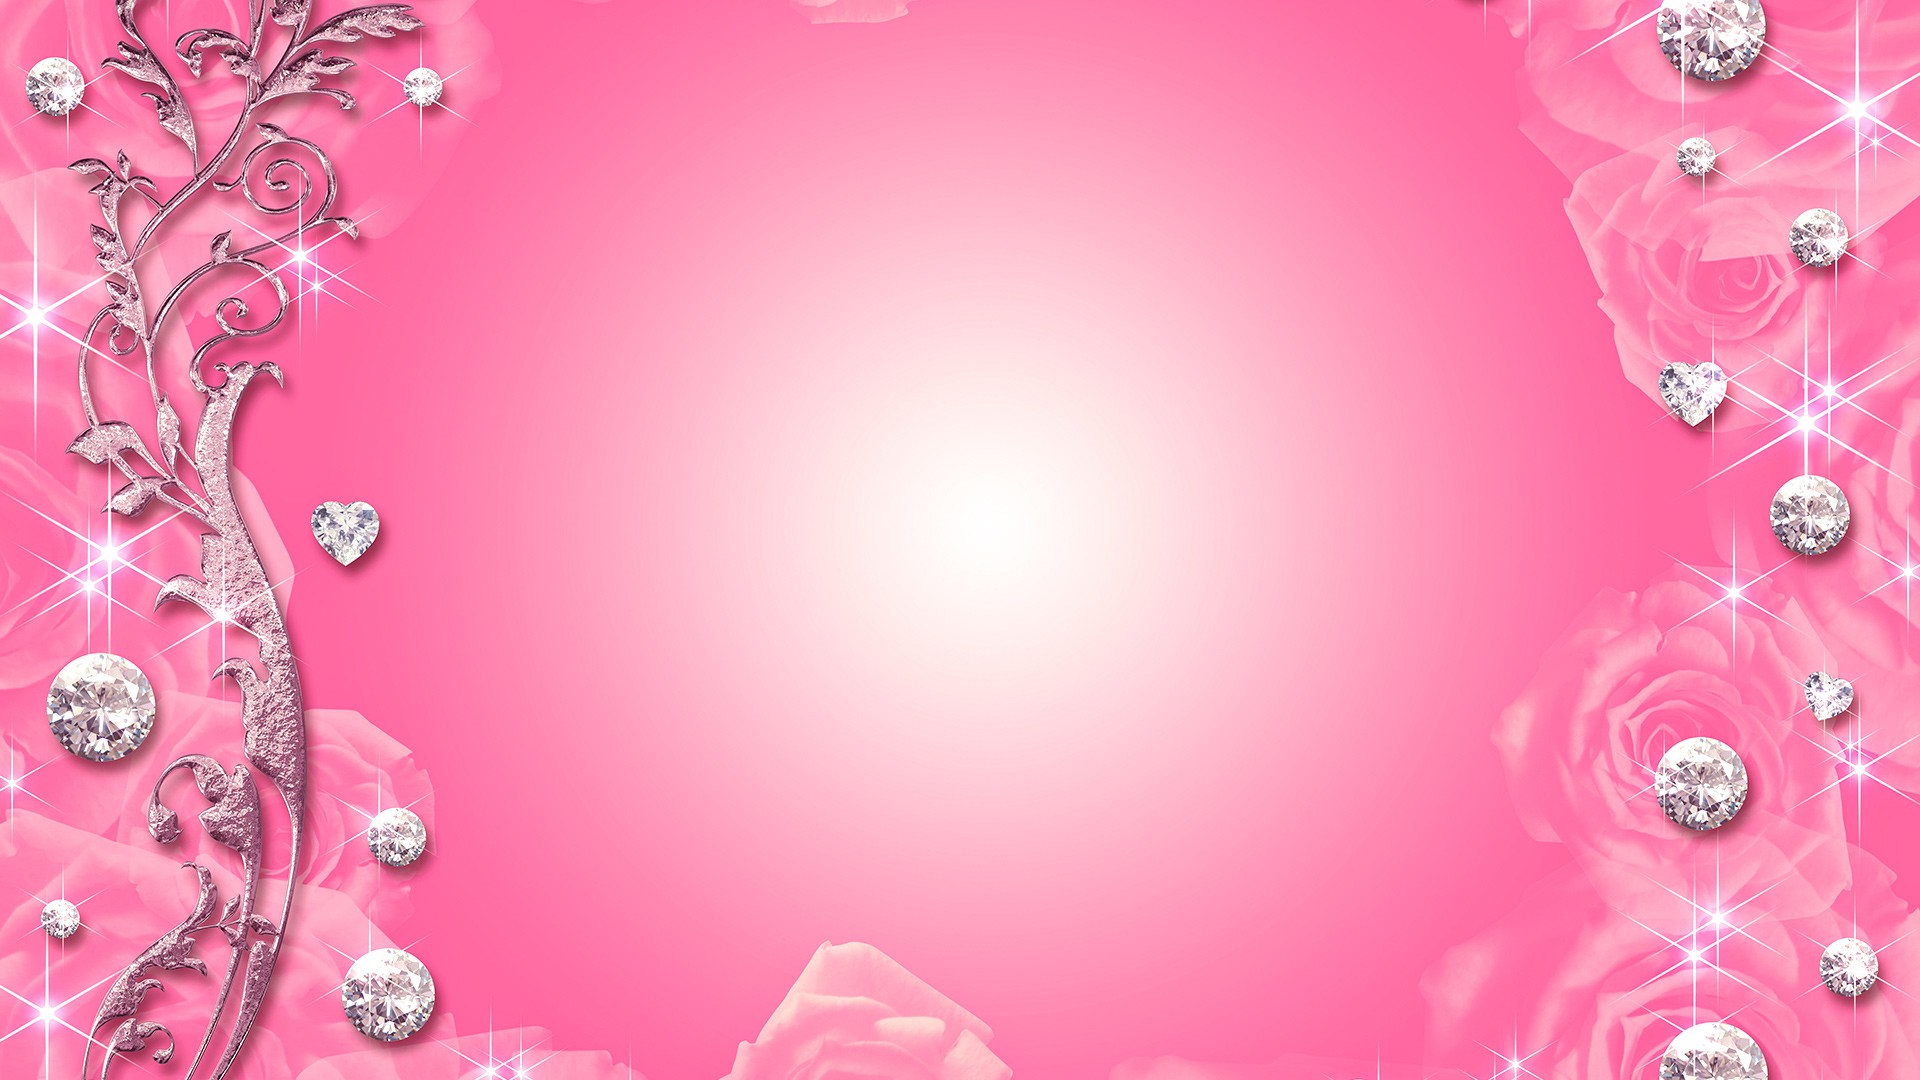 Abstract Flowers Wallpaper 1920x1080 Abstract Flowers Pink Diamonds